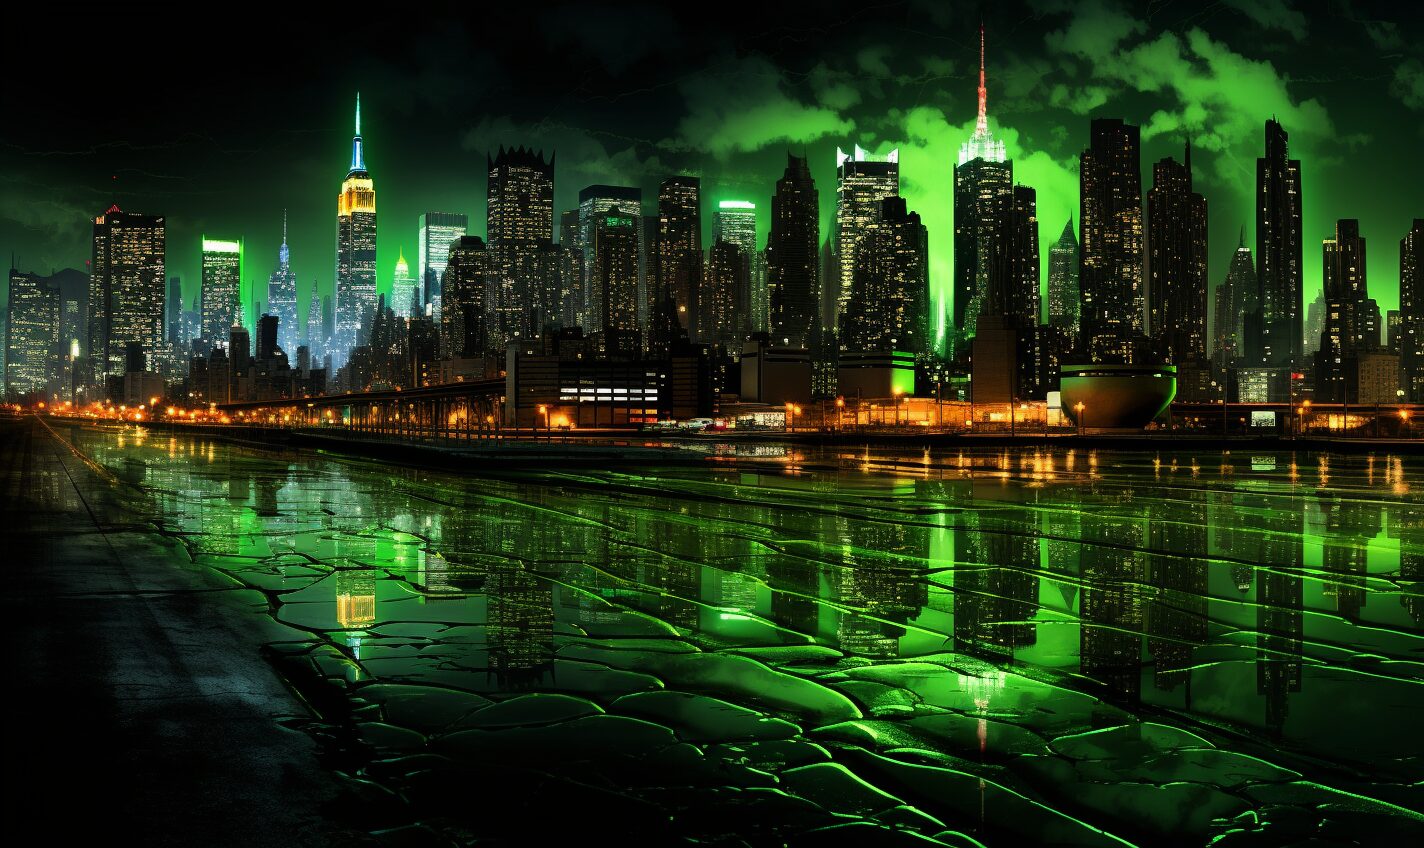 jericho, new york in a black and neon green glow